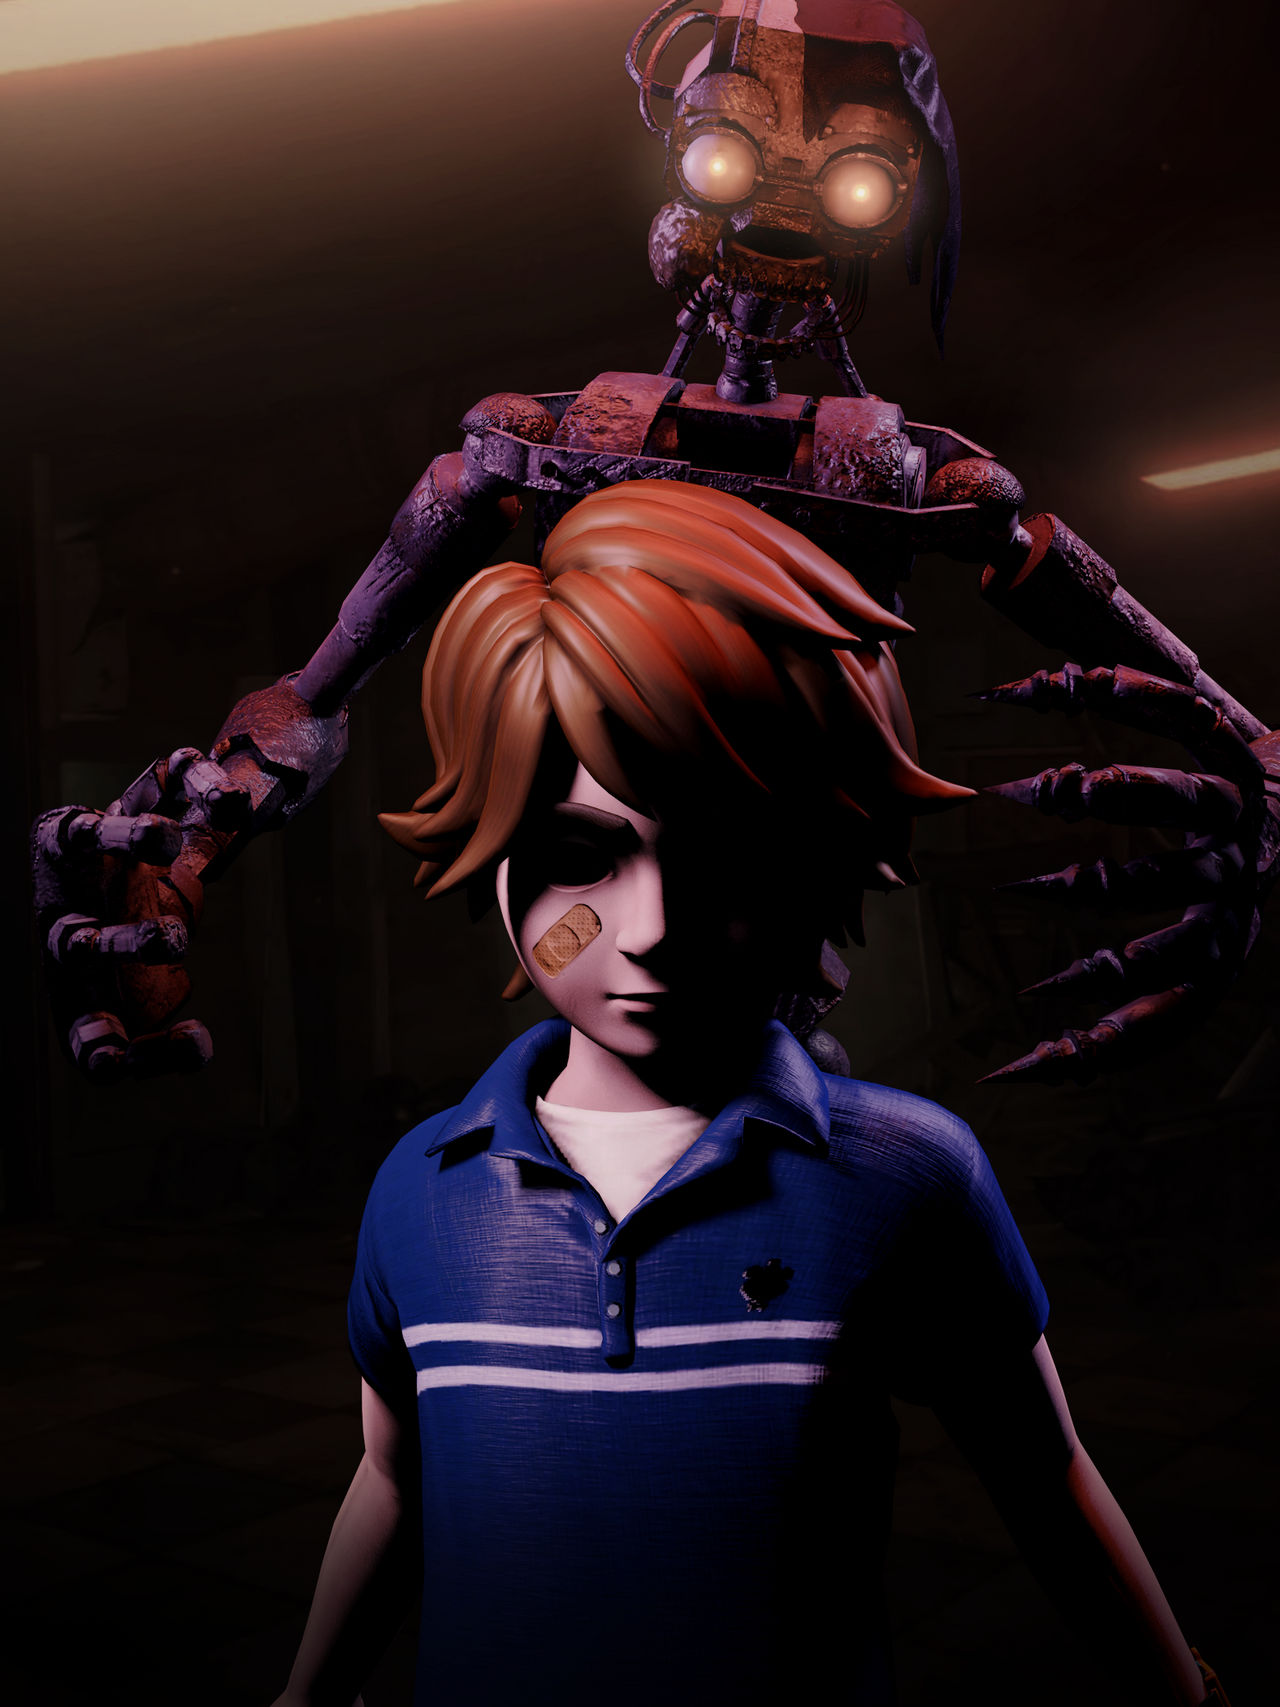 FNAF/C4D) Five Nights at Freddy's Movie by Mateus0510 on DeviantArt